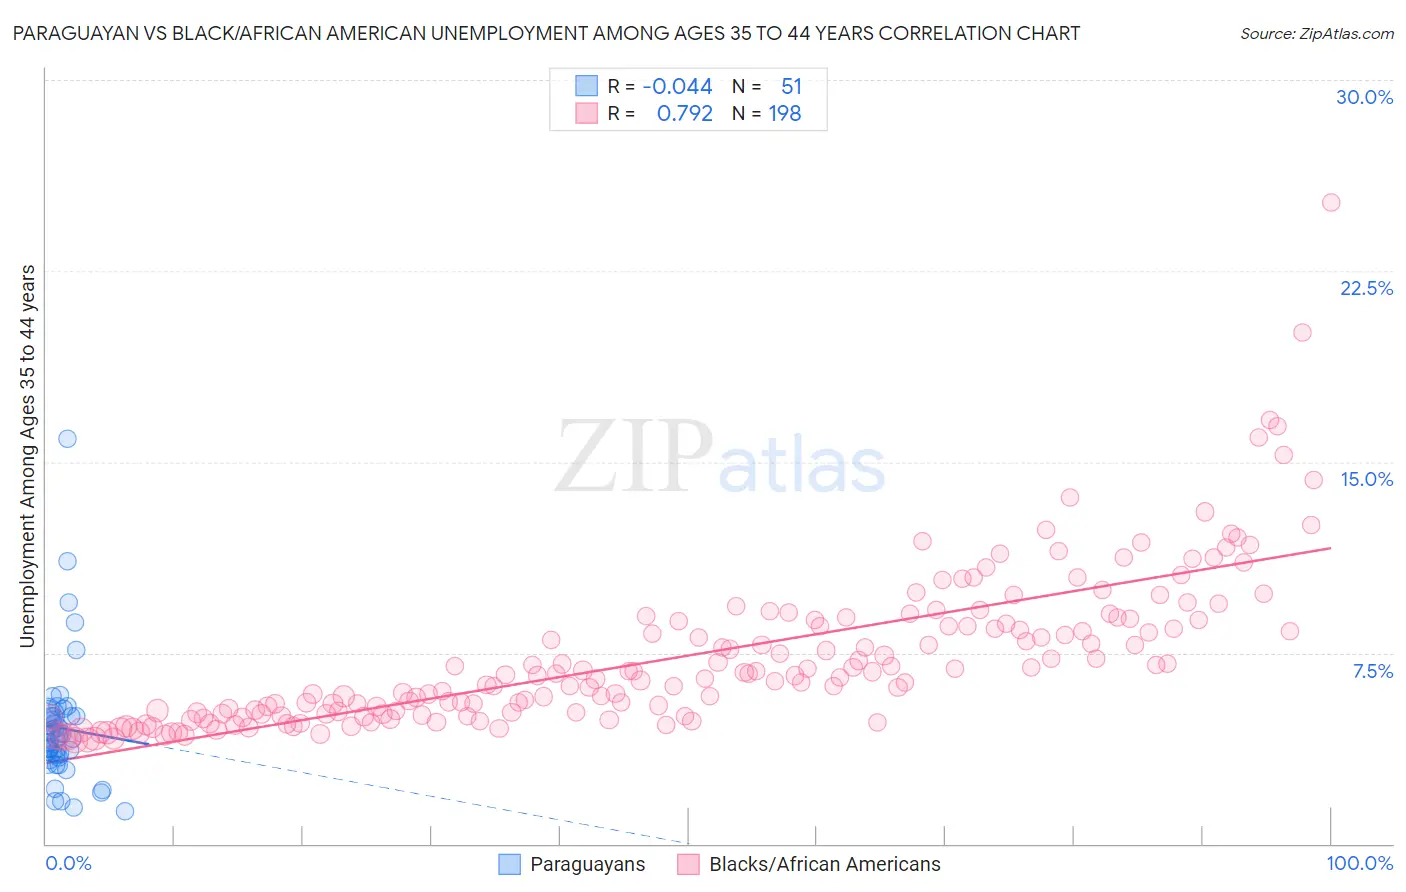 Paraguayan vs Black/African American Unemployment Among Ages 35 to 44 years